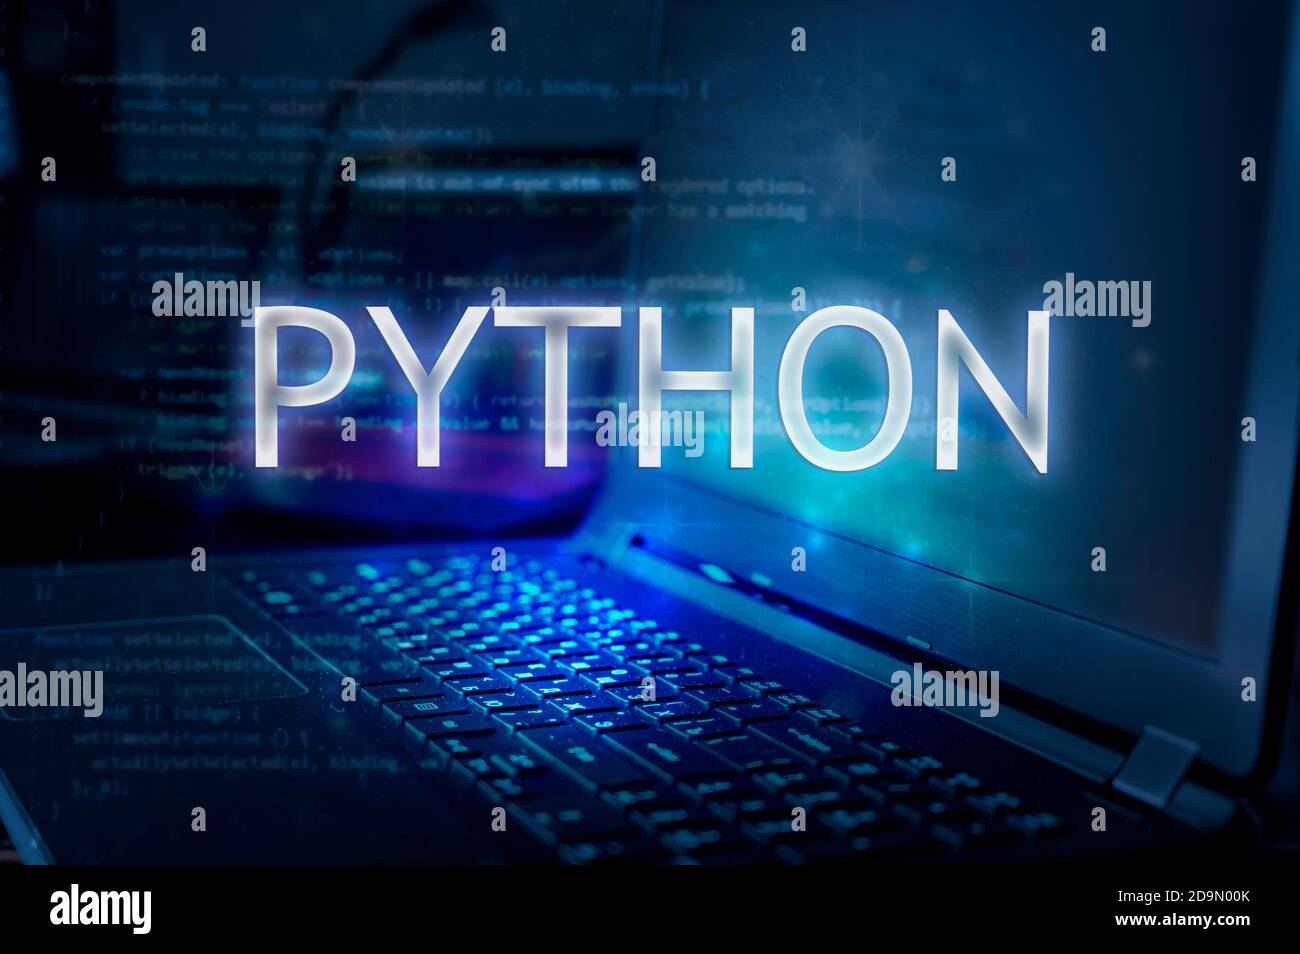 Python inscription against laptop and code background. Learn python programming language, computer courses, training. Stock Photo